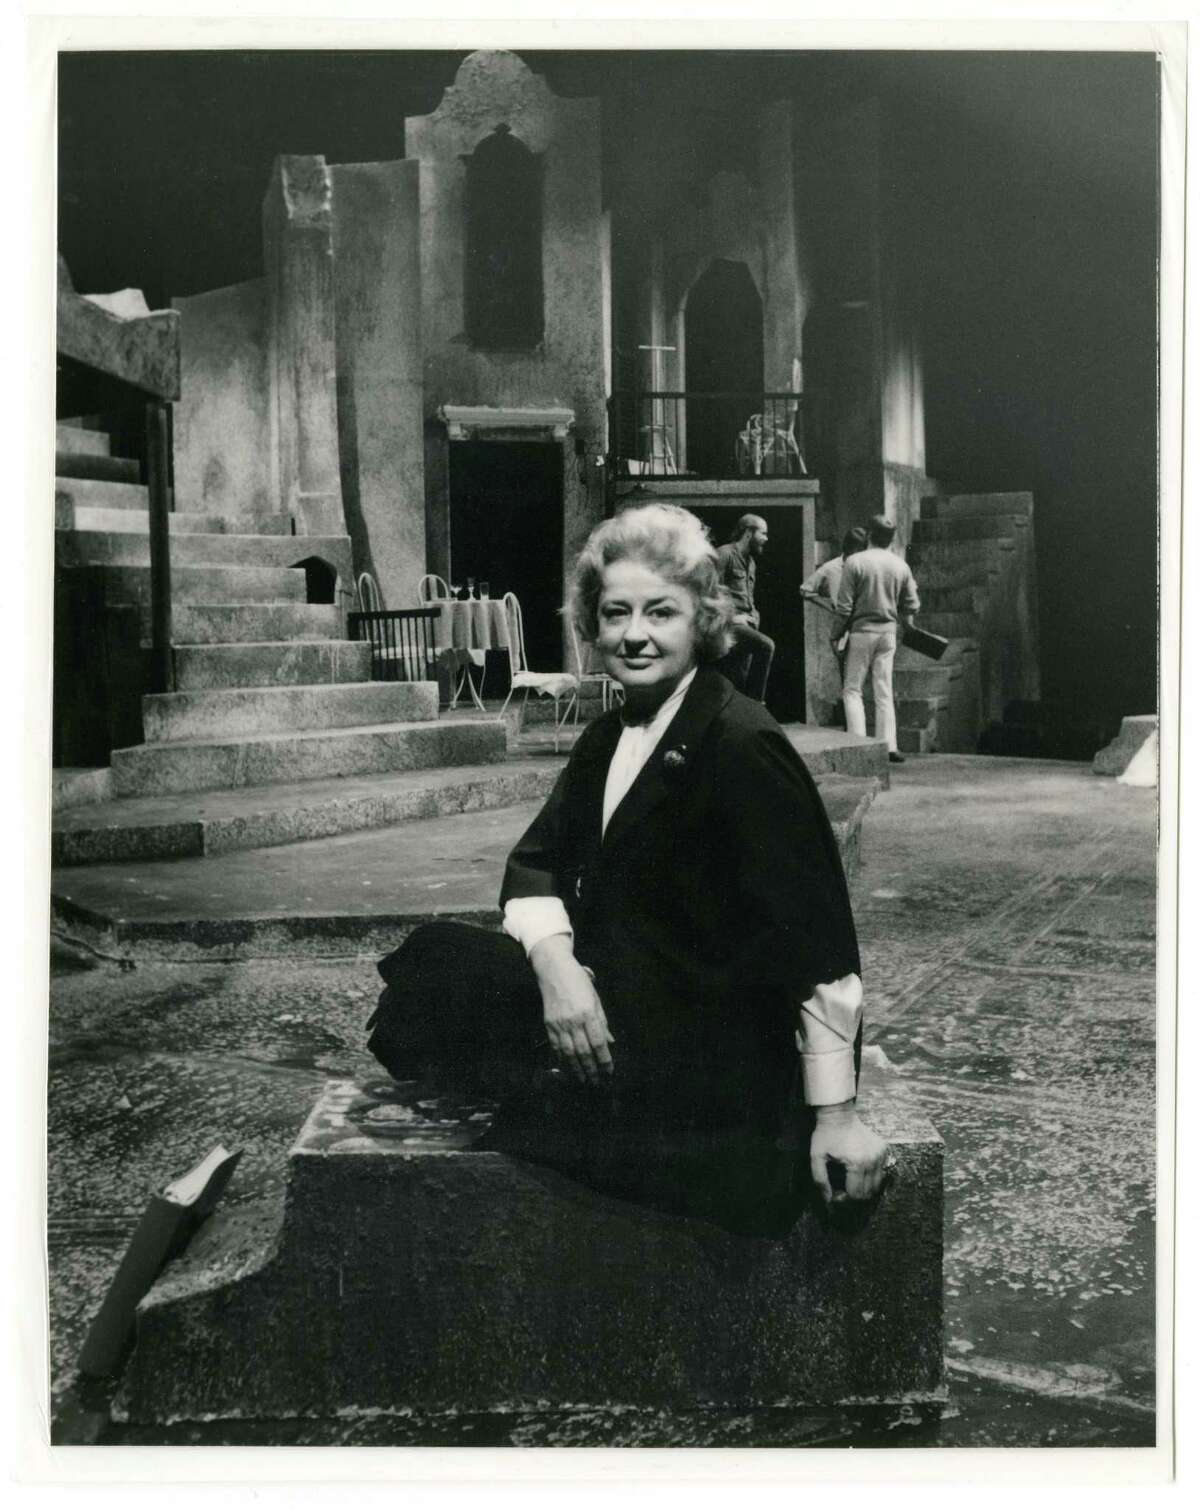 Alley Theatre founder Nina Vance ran the company for its first 33 years.﻿